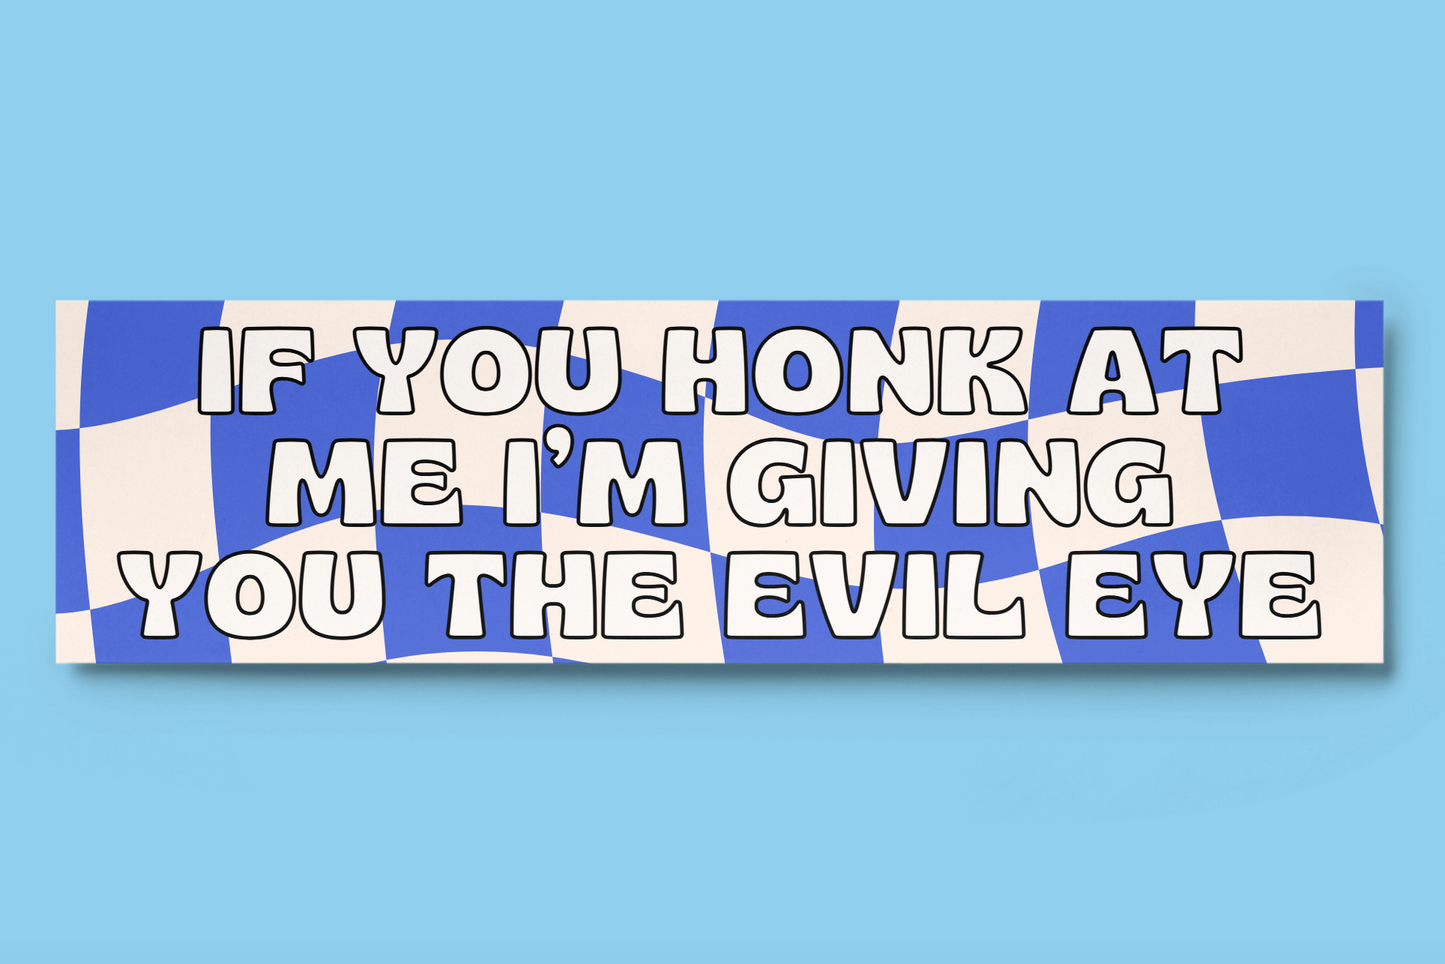 If You Honk At Me I'm Giving You The Evil Eye Bumper Sticker